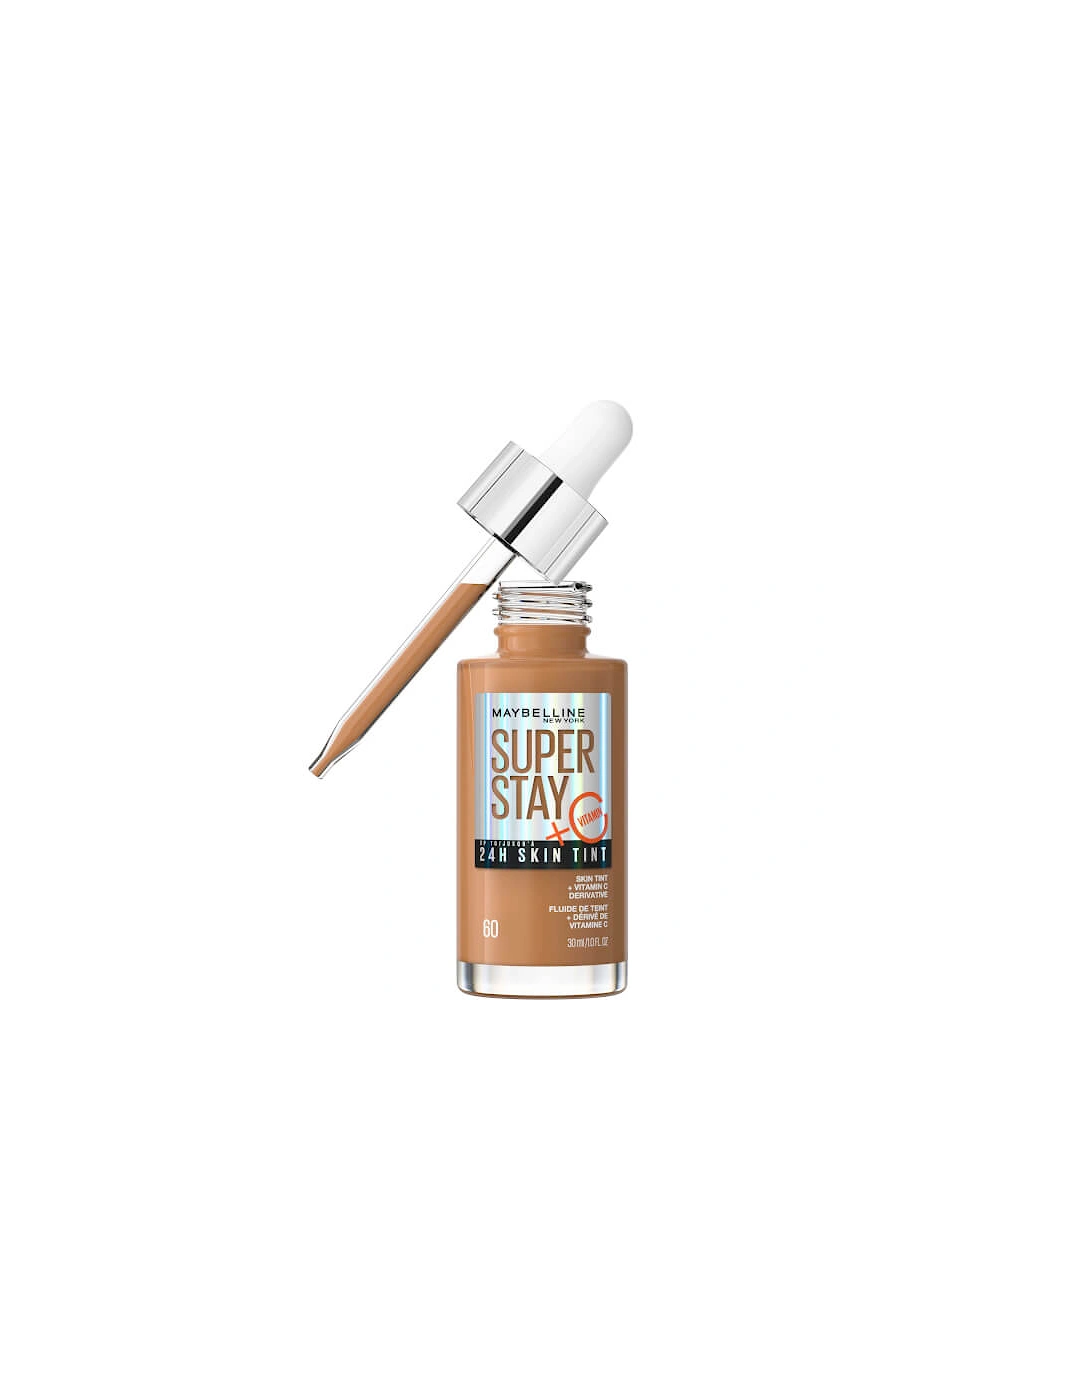 Super Stay up to 24H Skin Tint Foundation + Vitamin C - Shade 60, 2 of 1